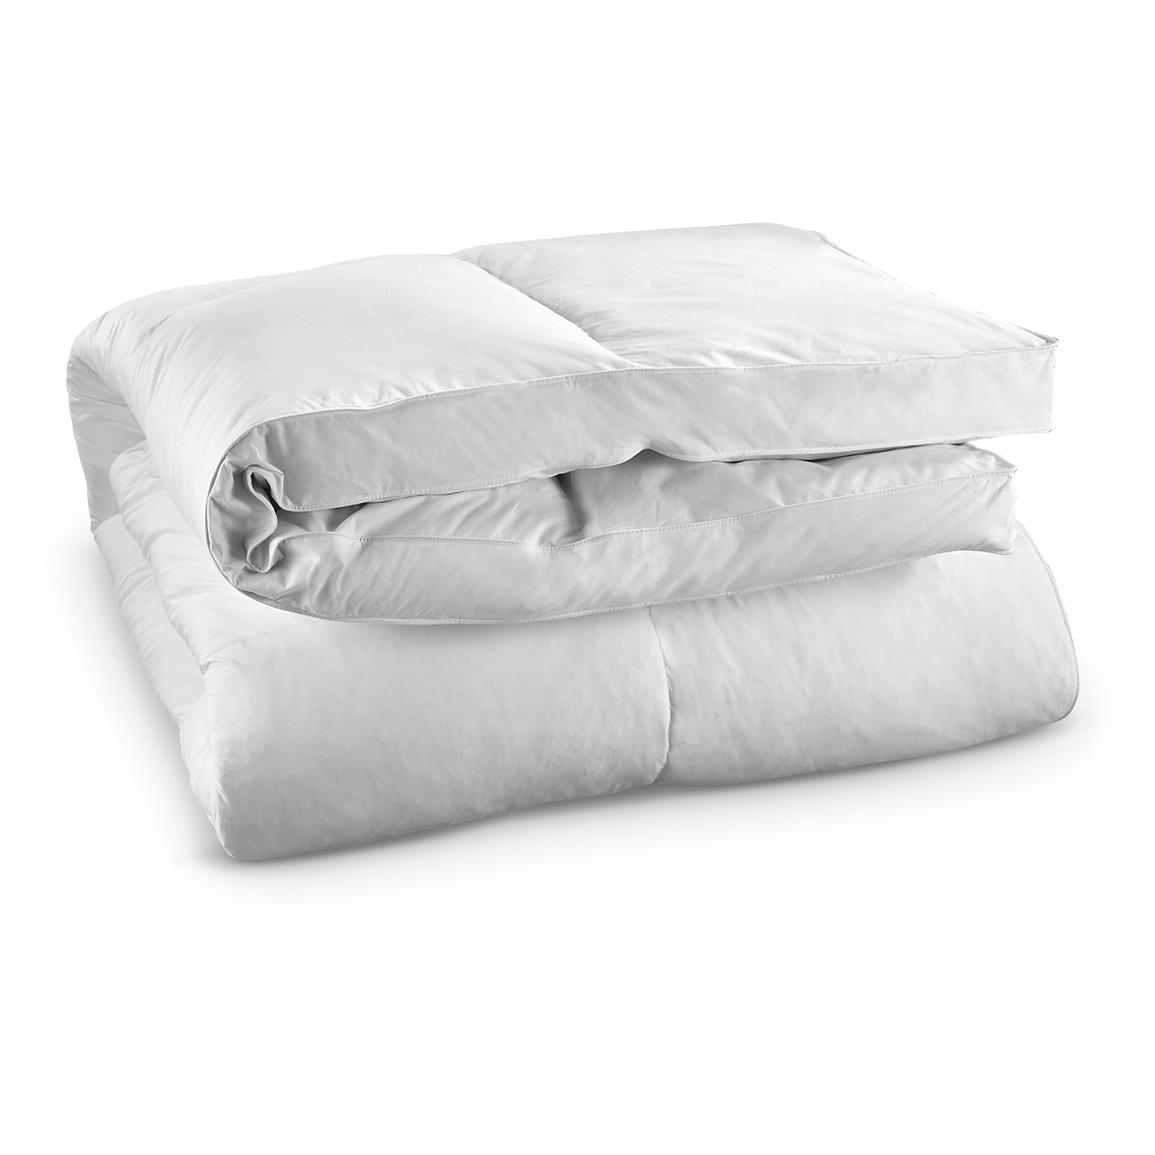 New U.S. Military Issue Full-size Feather Mattress Topper - 662618 ...